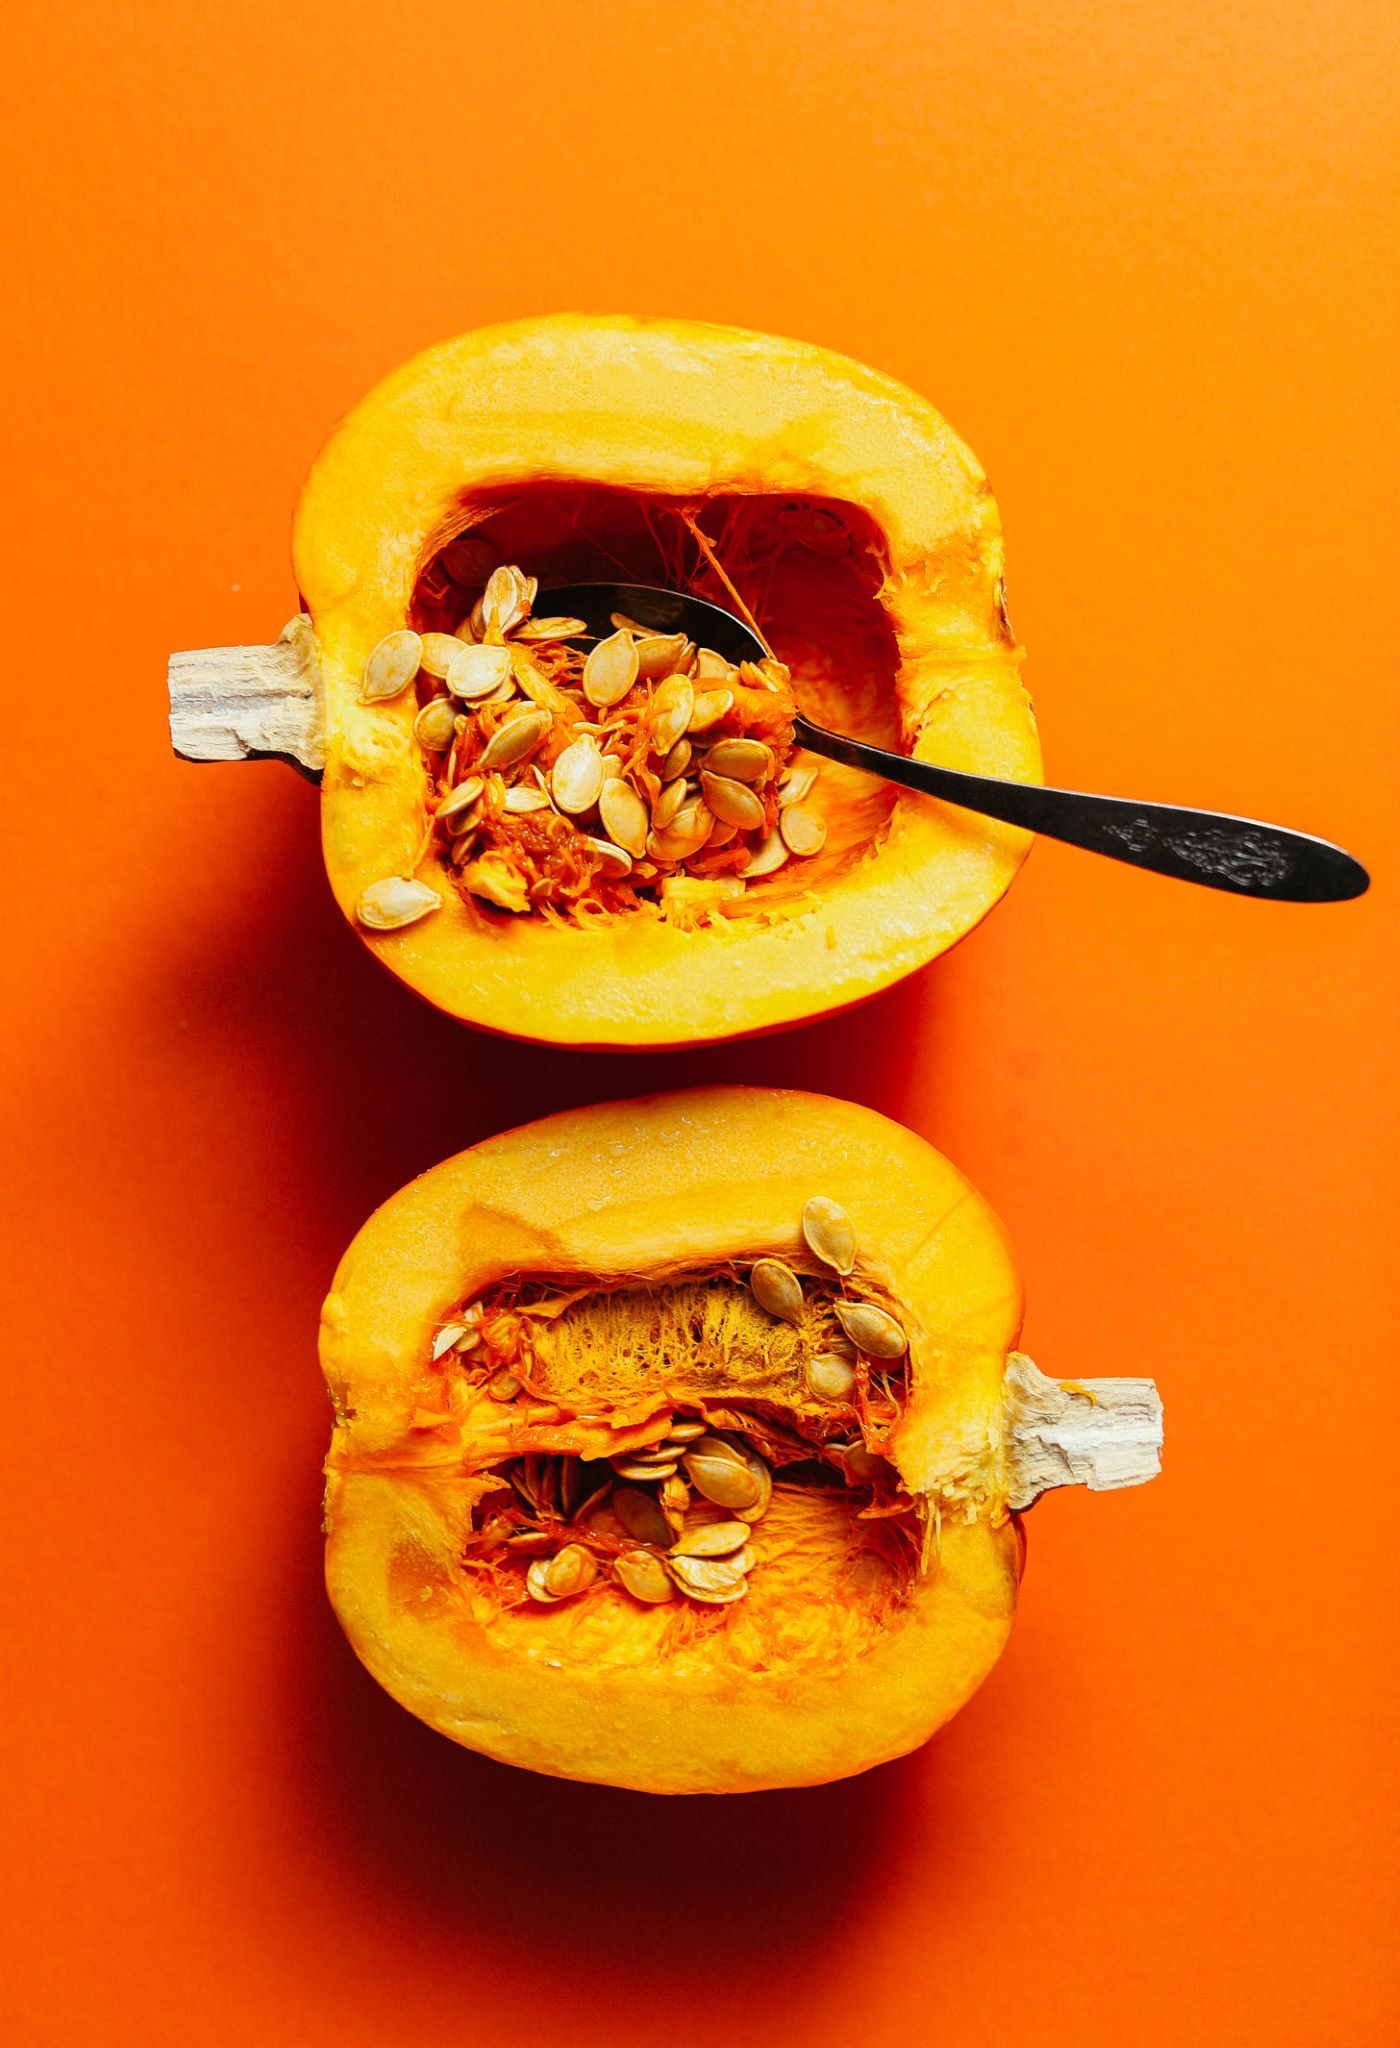 What Can You Make With Pumpkin Seeds